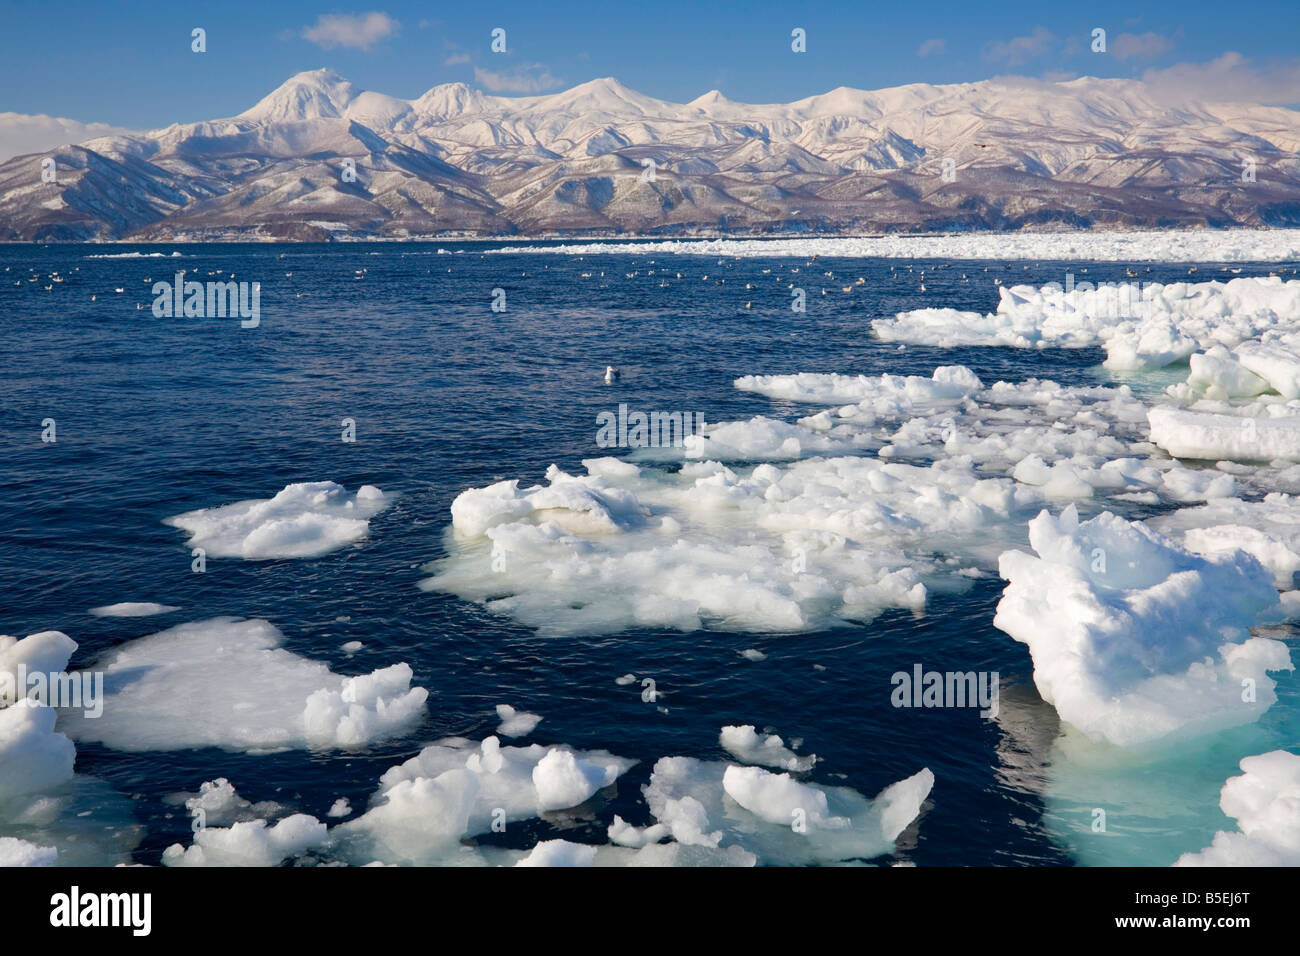 Hokkaido Japan: Ice floes in the Strait of Nemuro with the snow covered mountains of the Shiretoko Peninsula in the distance Stock Photo